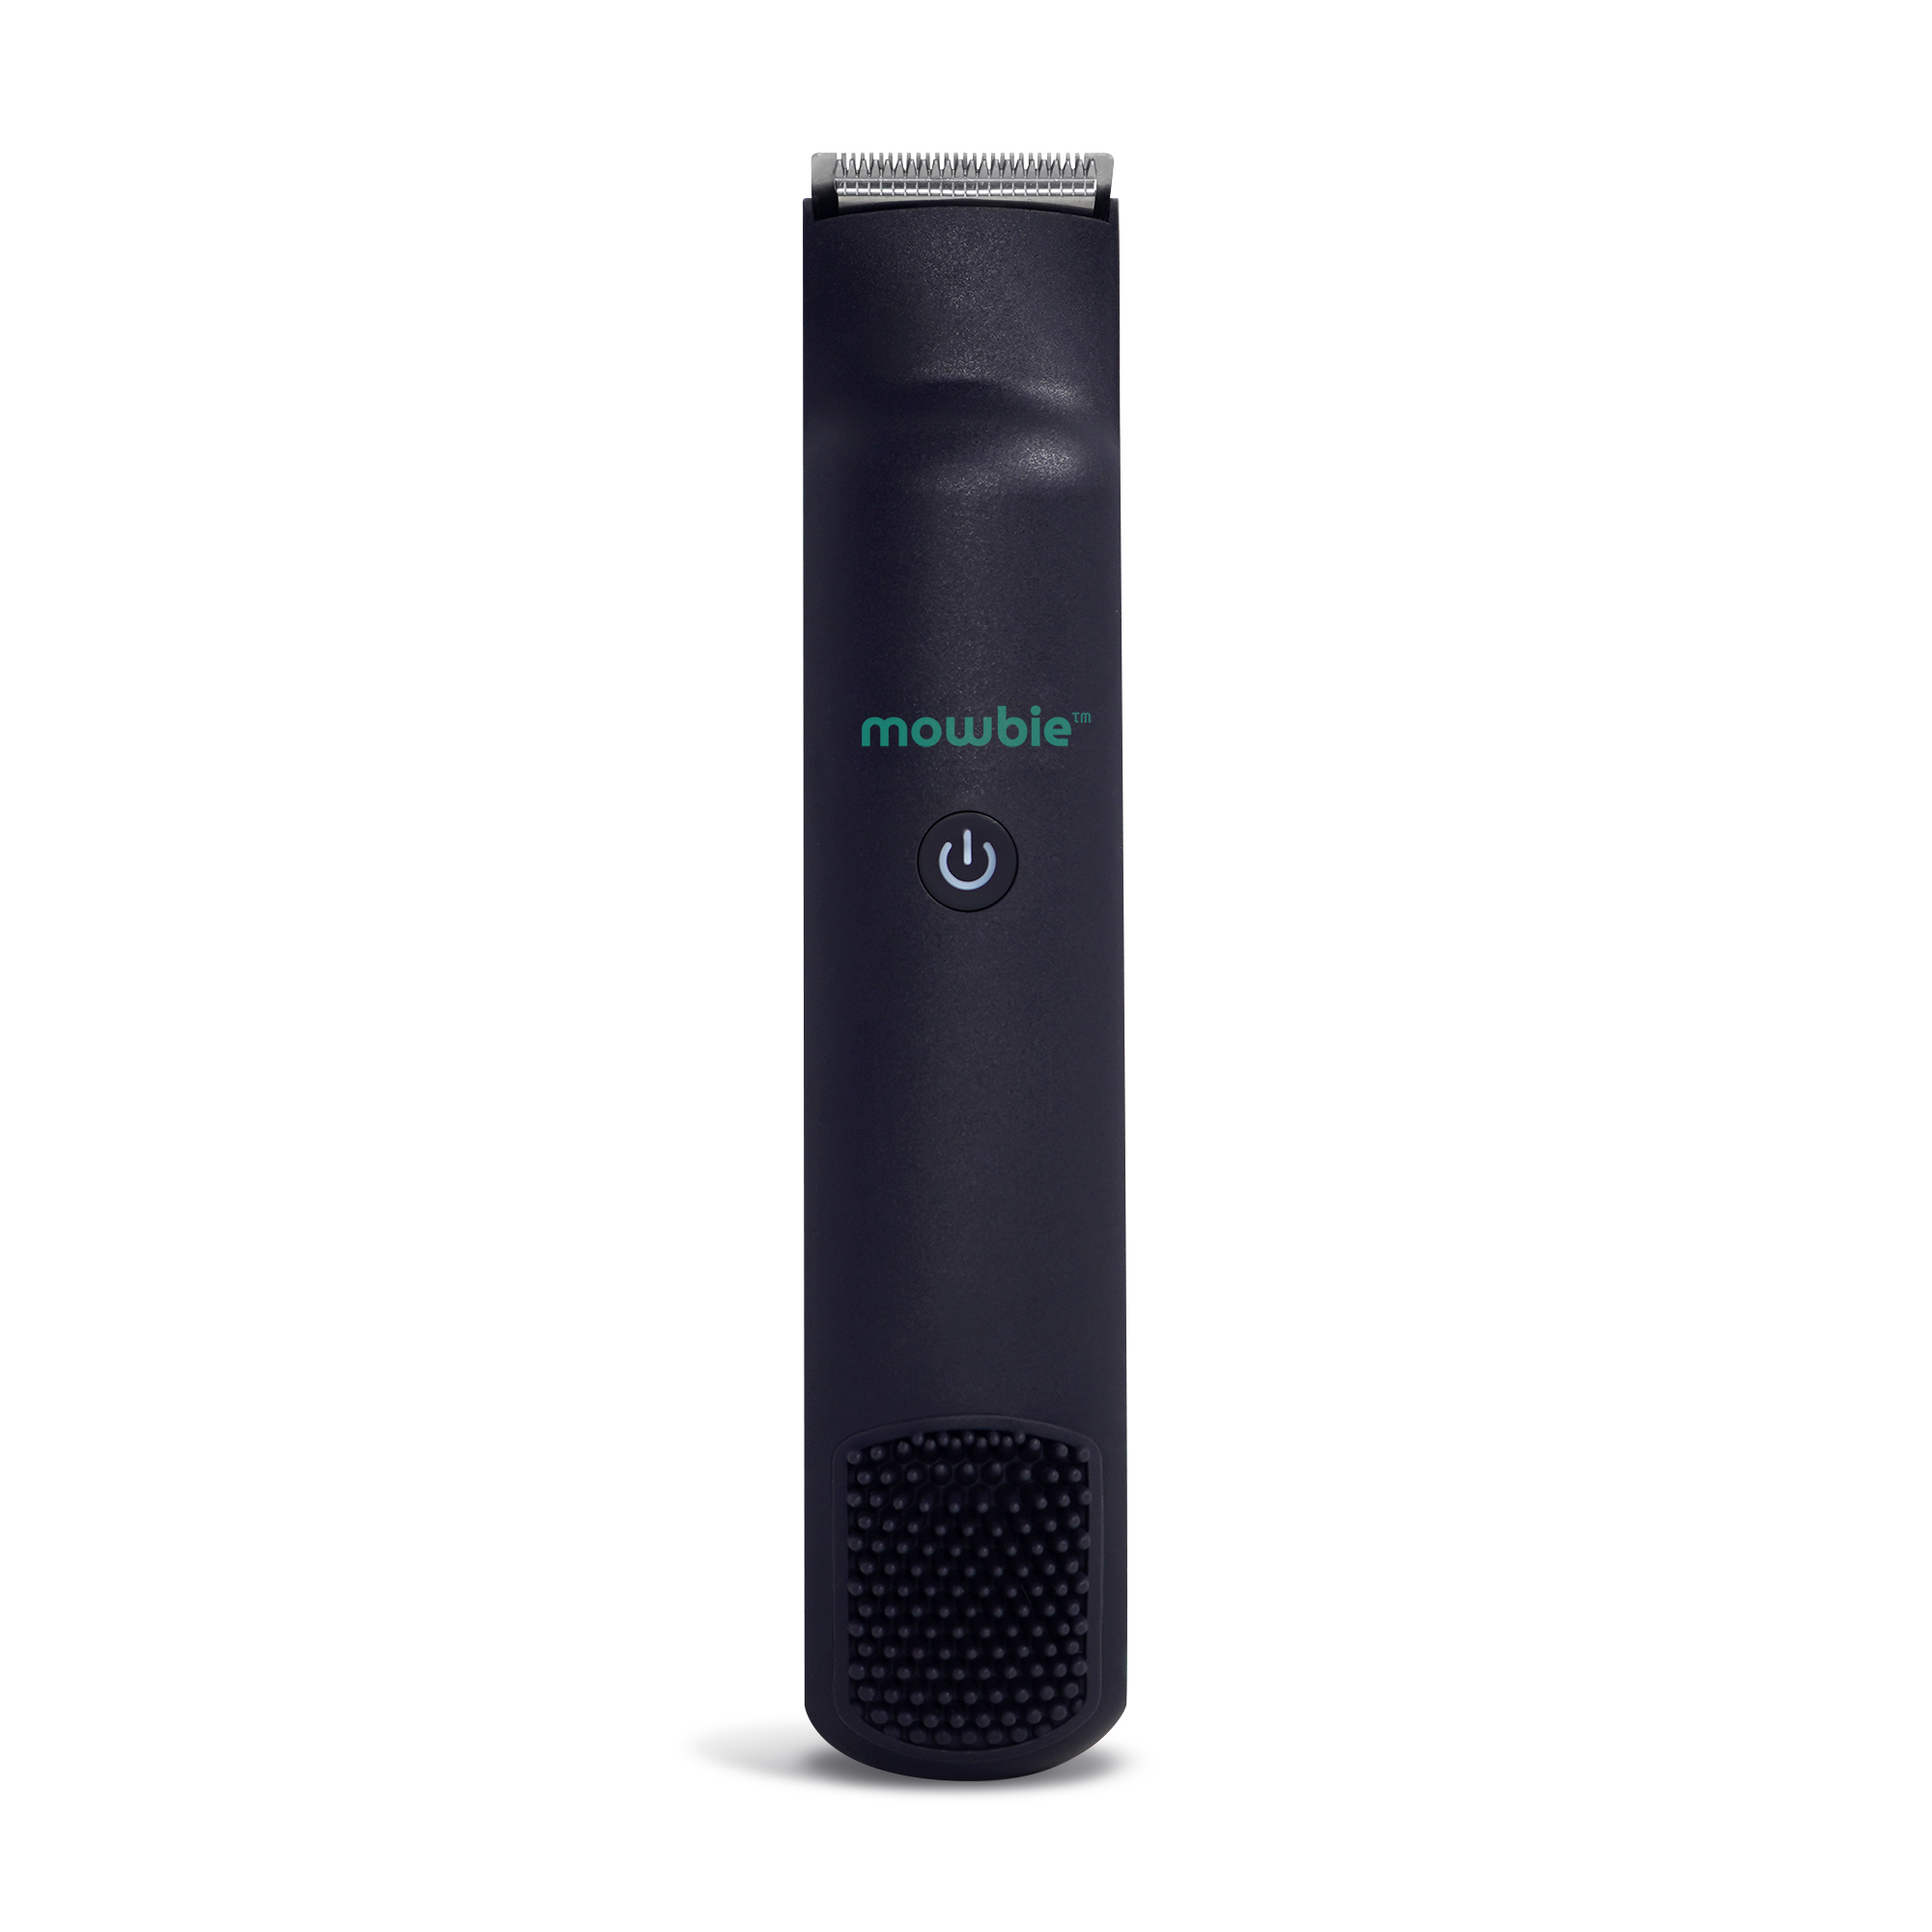 mowbie Beard Trimmer, Male Hair Trimmer & Clipper, Waterproof, Green LED - image 1 of 12